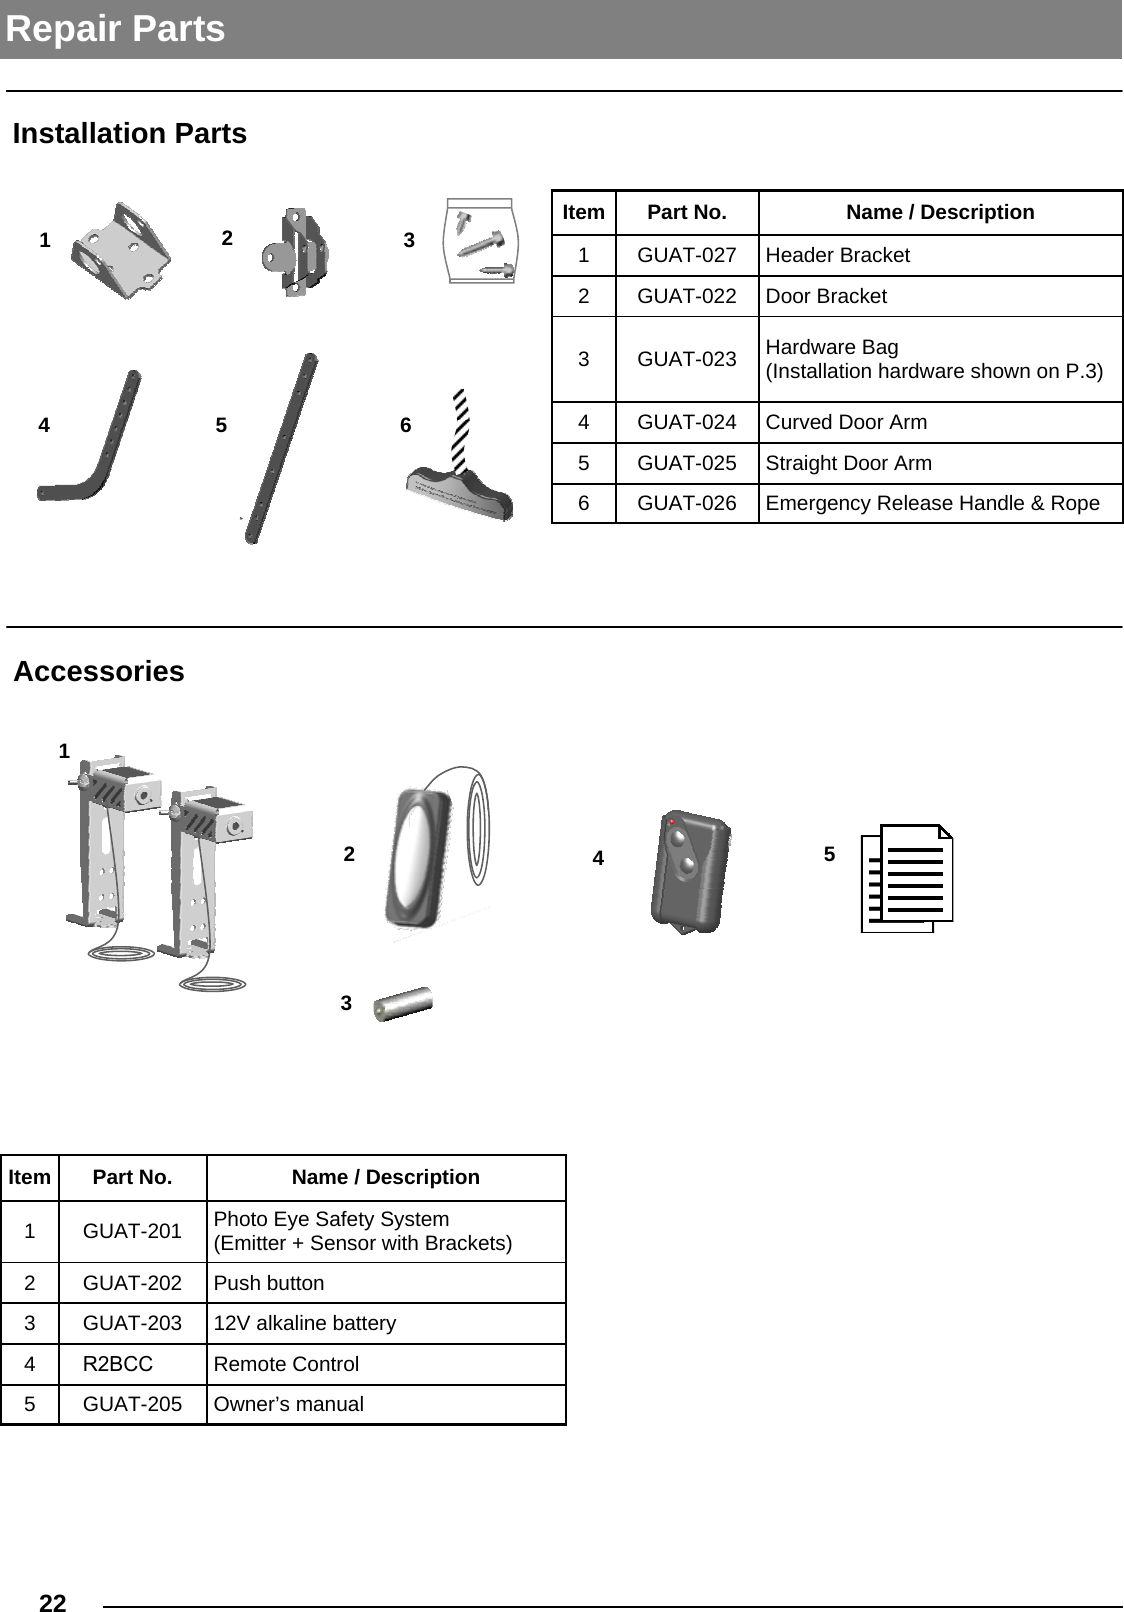 22  Installation Parts 234 5 61Repair Parts Item Part No. Name / Description1GUAT-027 Header Bracket2GUAT-022 Door Bracket3GUAT-023 Hardware Bag (Installation hardware shown on P.3)4GUAT-024 Curved Door Arm5GUAT-025 Straight Door Arm6GUAT-026 Emergency Release Handle &amp; RopeAccessoriesItem Part No. Name / Description1GUAT-201 Photo Eye Safety System (Emitter + Sensor with Brackets)2GUAT-202 Push button3GUAT-203 12V alkaline battery4R2BCC Remote Control5GUAT-205 Owner’s manual12354